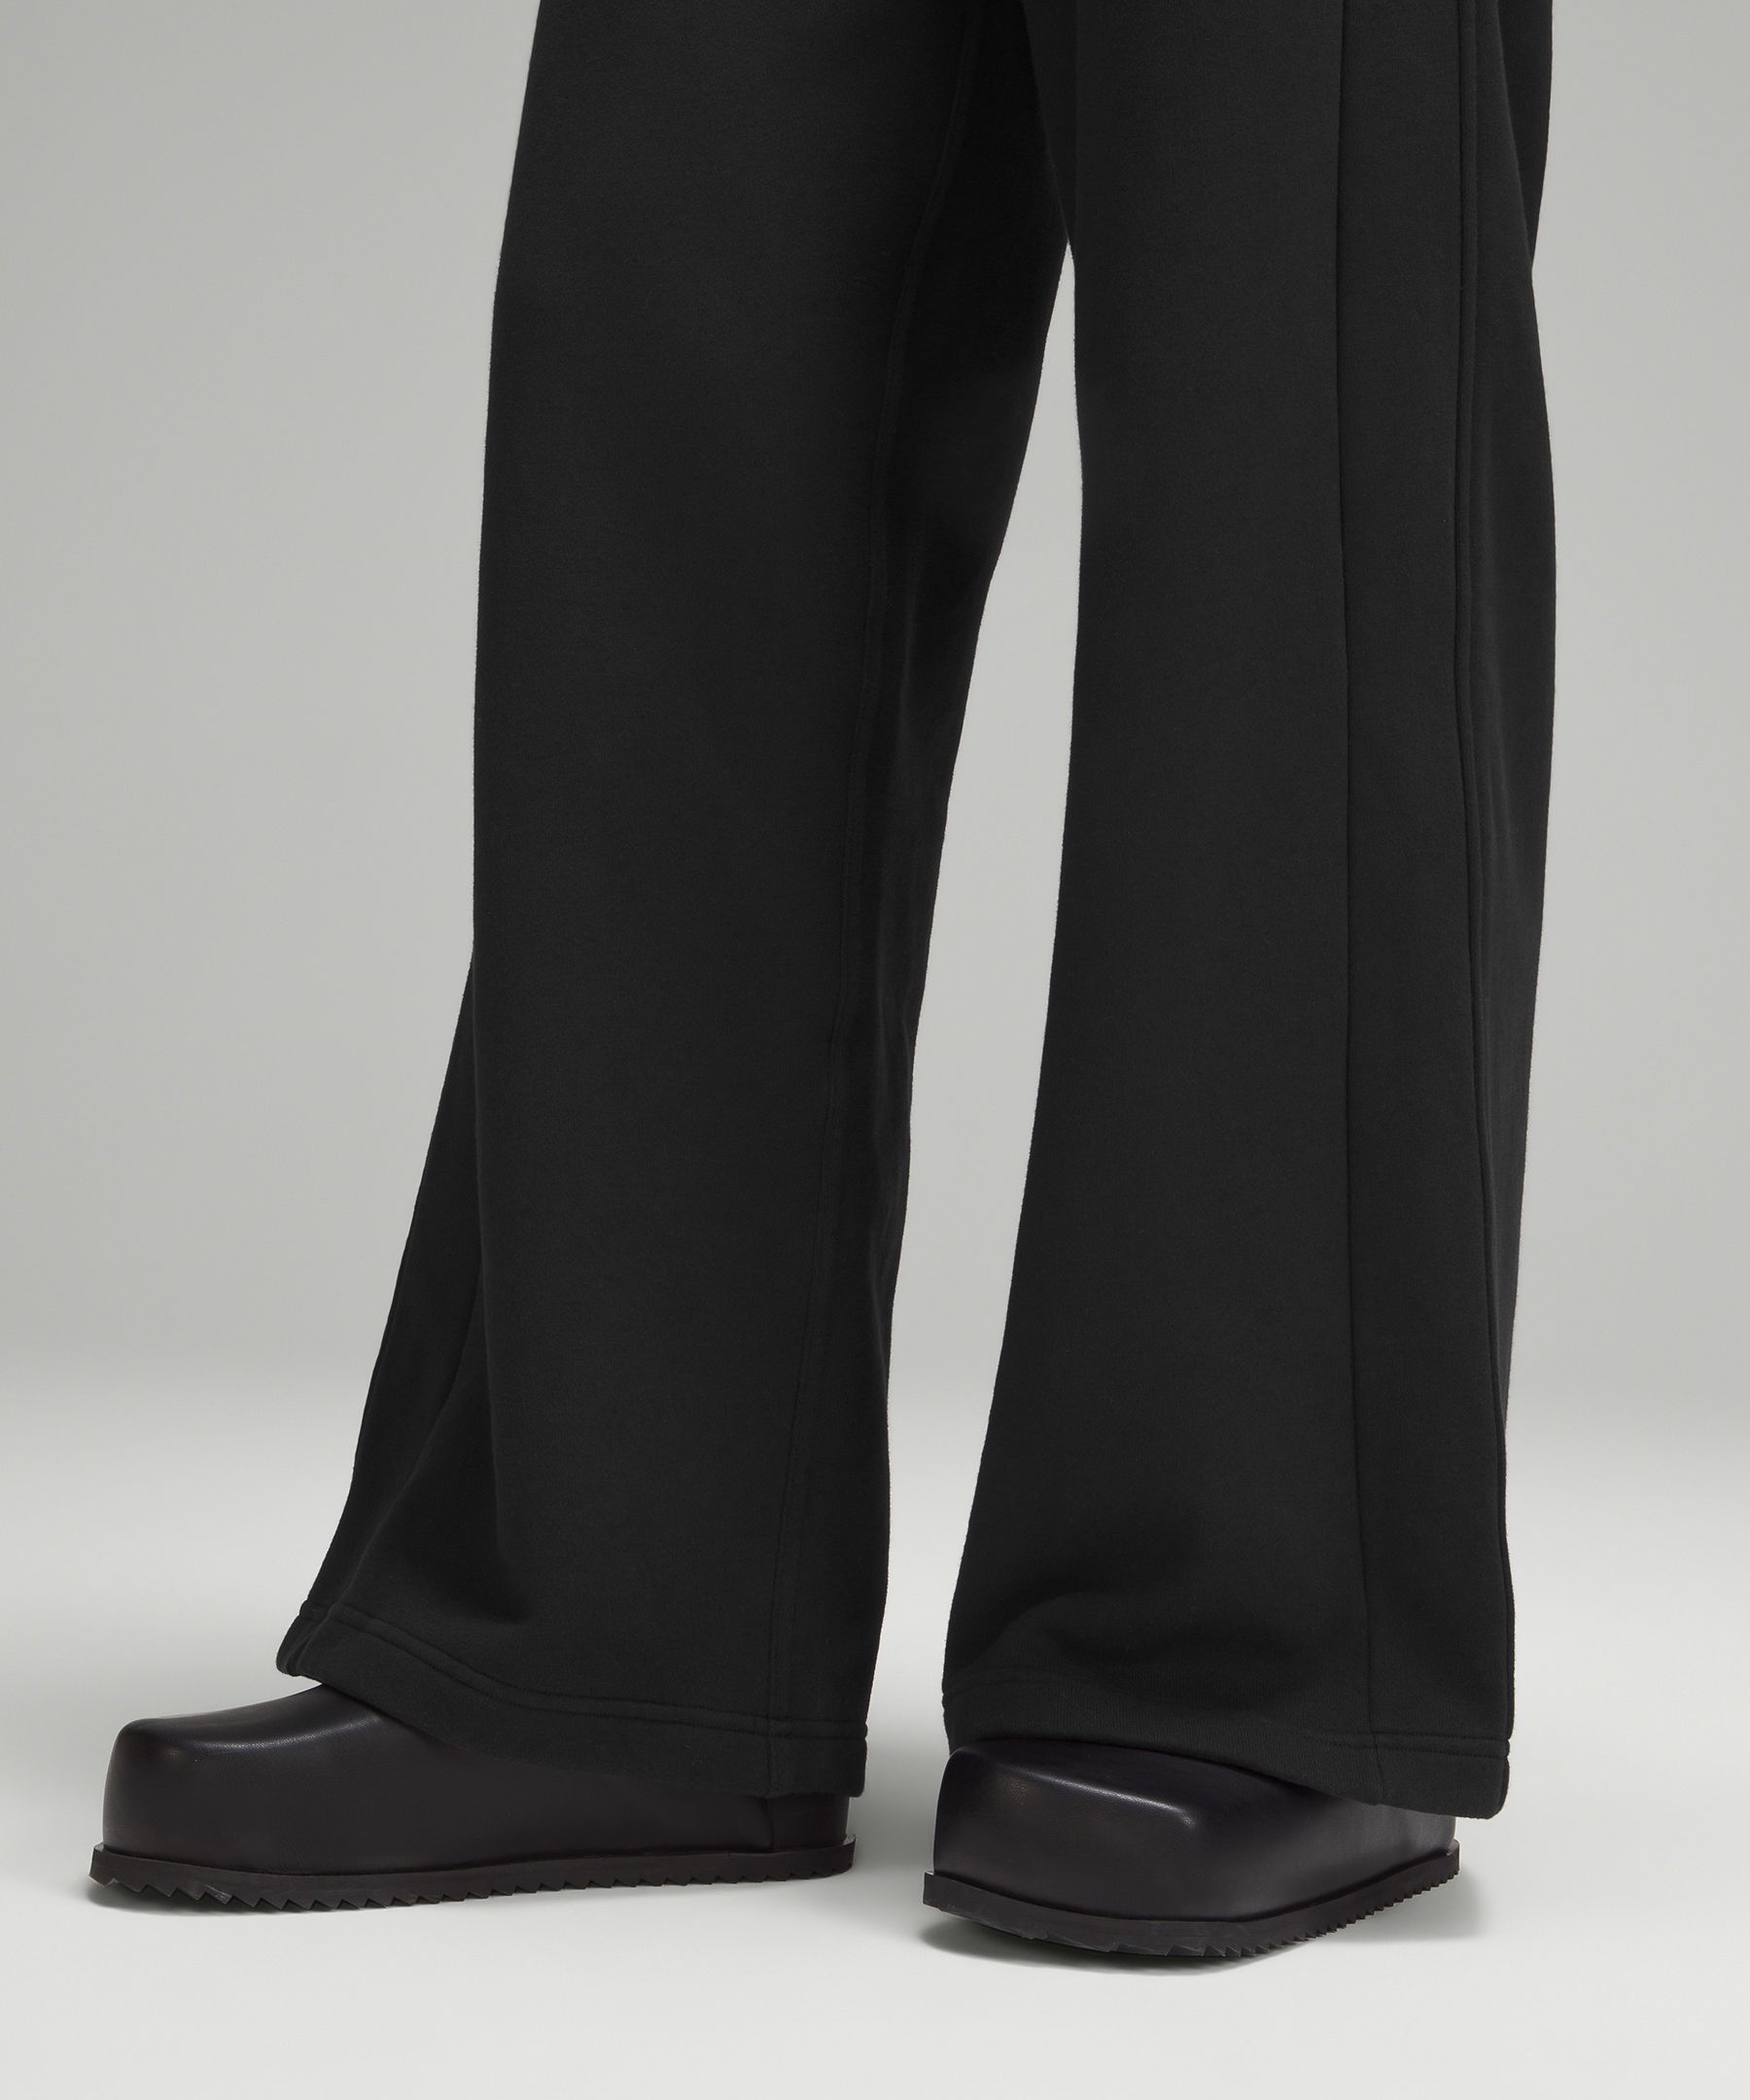 Can the scuba mid rise wide leg pants be hemmed? It's way too long for me.  : r/lululemon